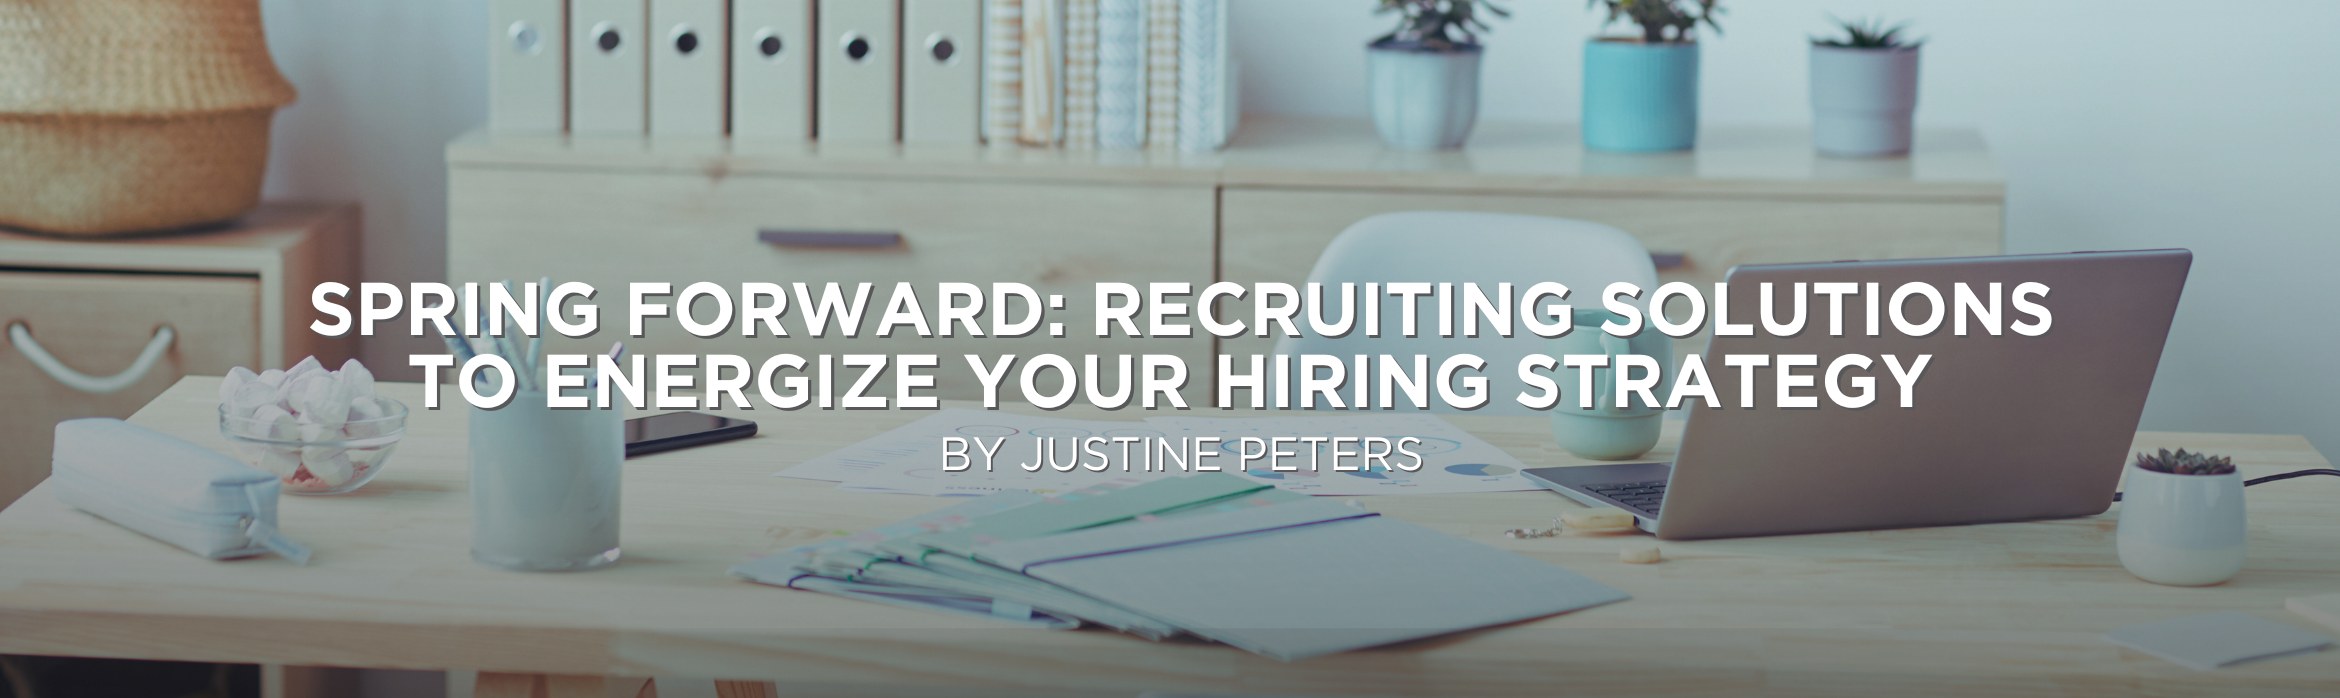 Spring Forward: Recruiting Solutions to Energize Your Hiring Strategy